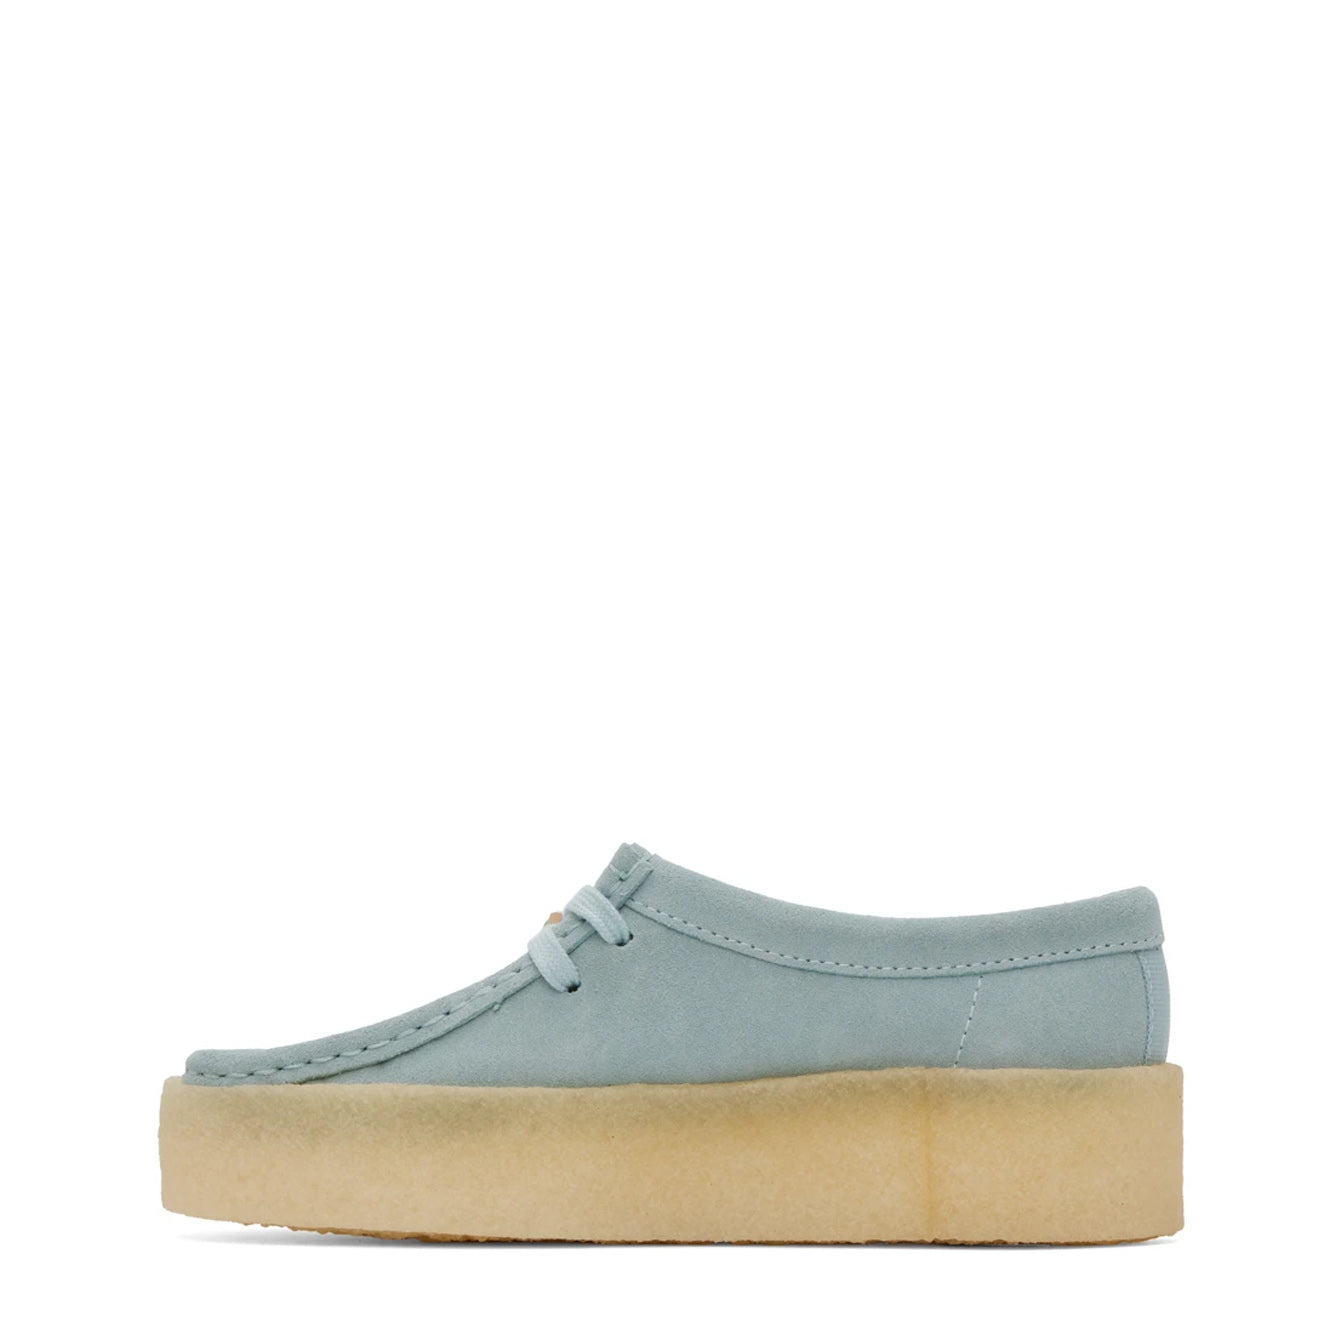 Clarks Originals Womens Wallabee Cup Blue Suede | The Sporting Lodge